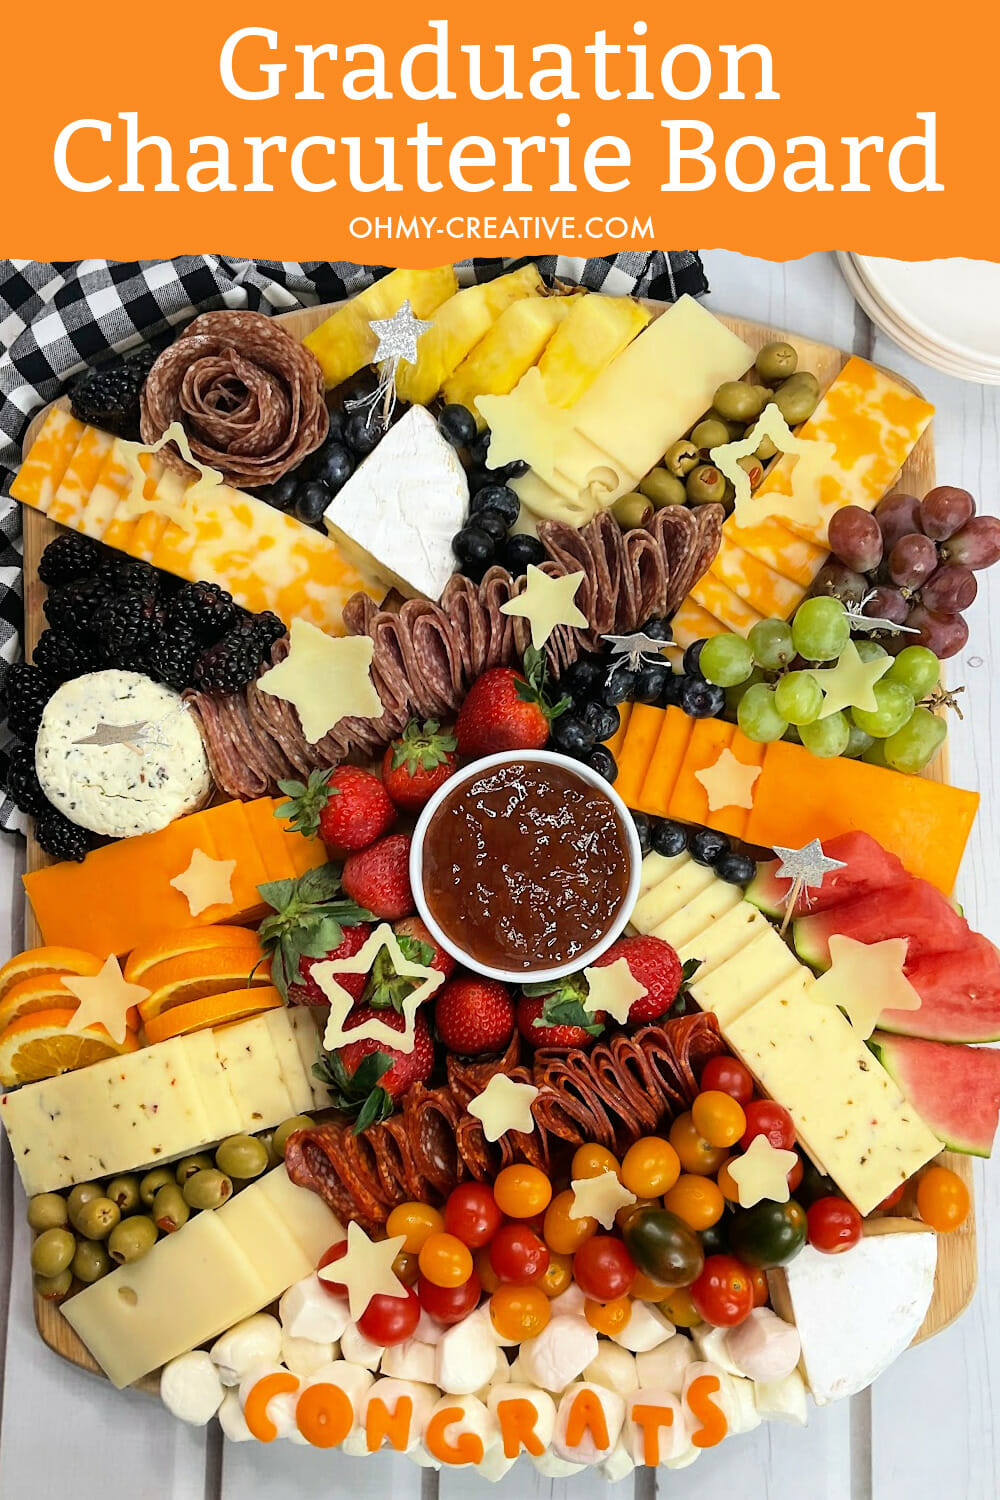 From Diploma To Delicious: How To Make A Graduation Charcuterie Board